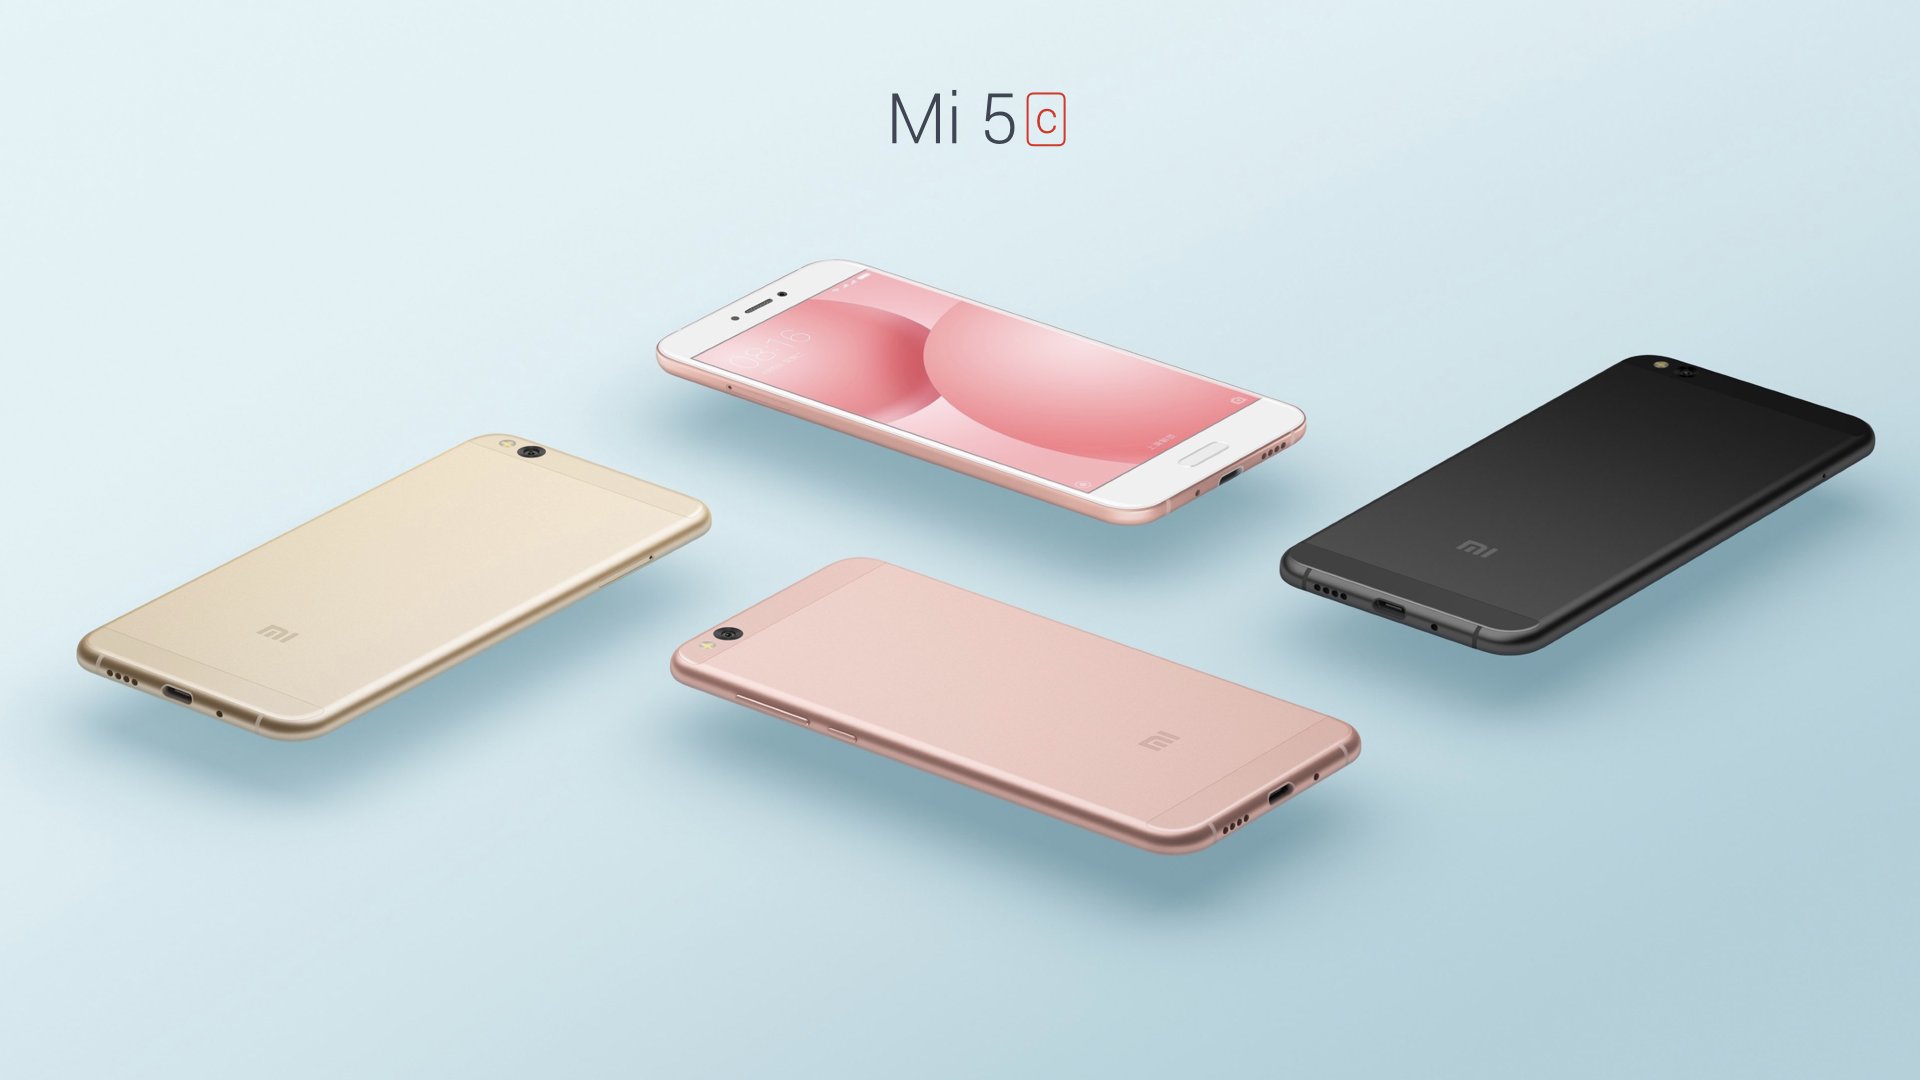 Xiaomi Mi 5C announced with in-house Surge S1 SoC, full HD display and 3GB RAM